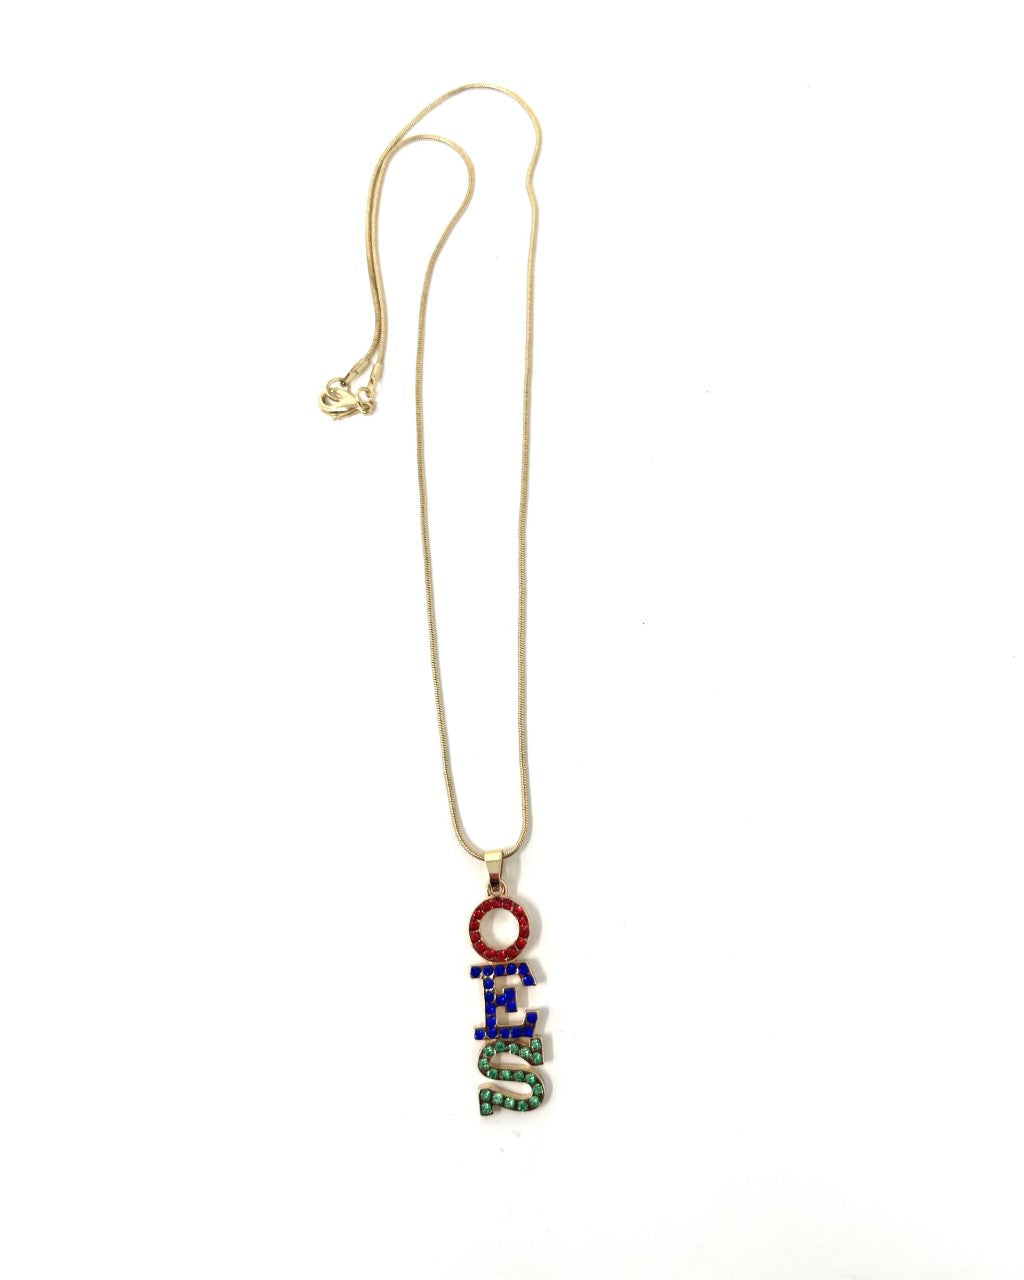 Order of Eastern Star Gold Crystal Necklace